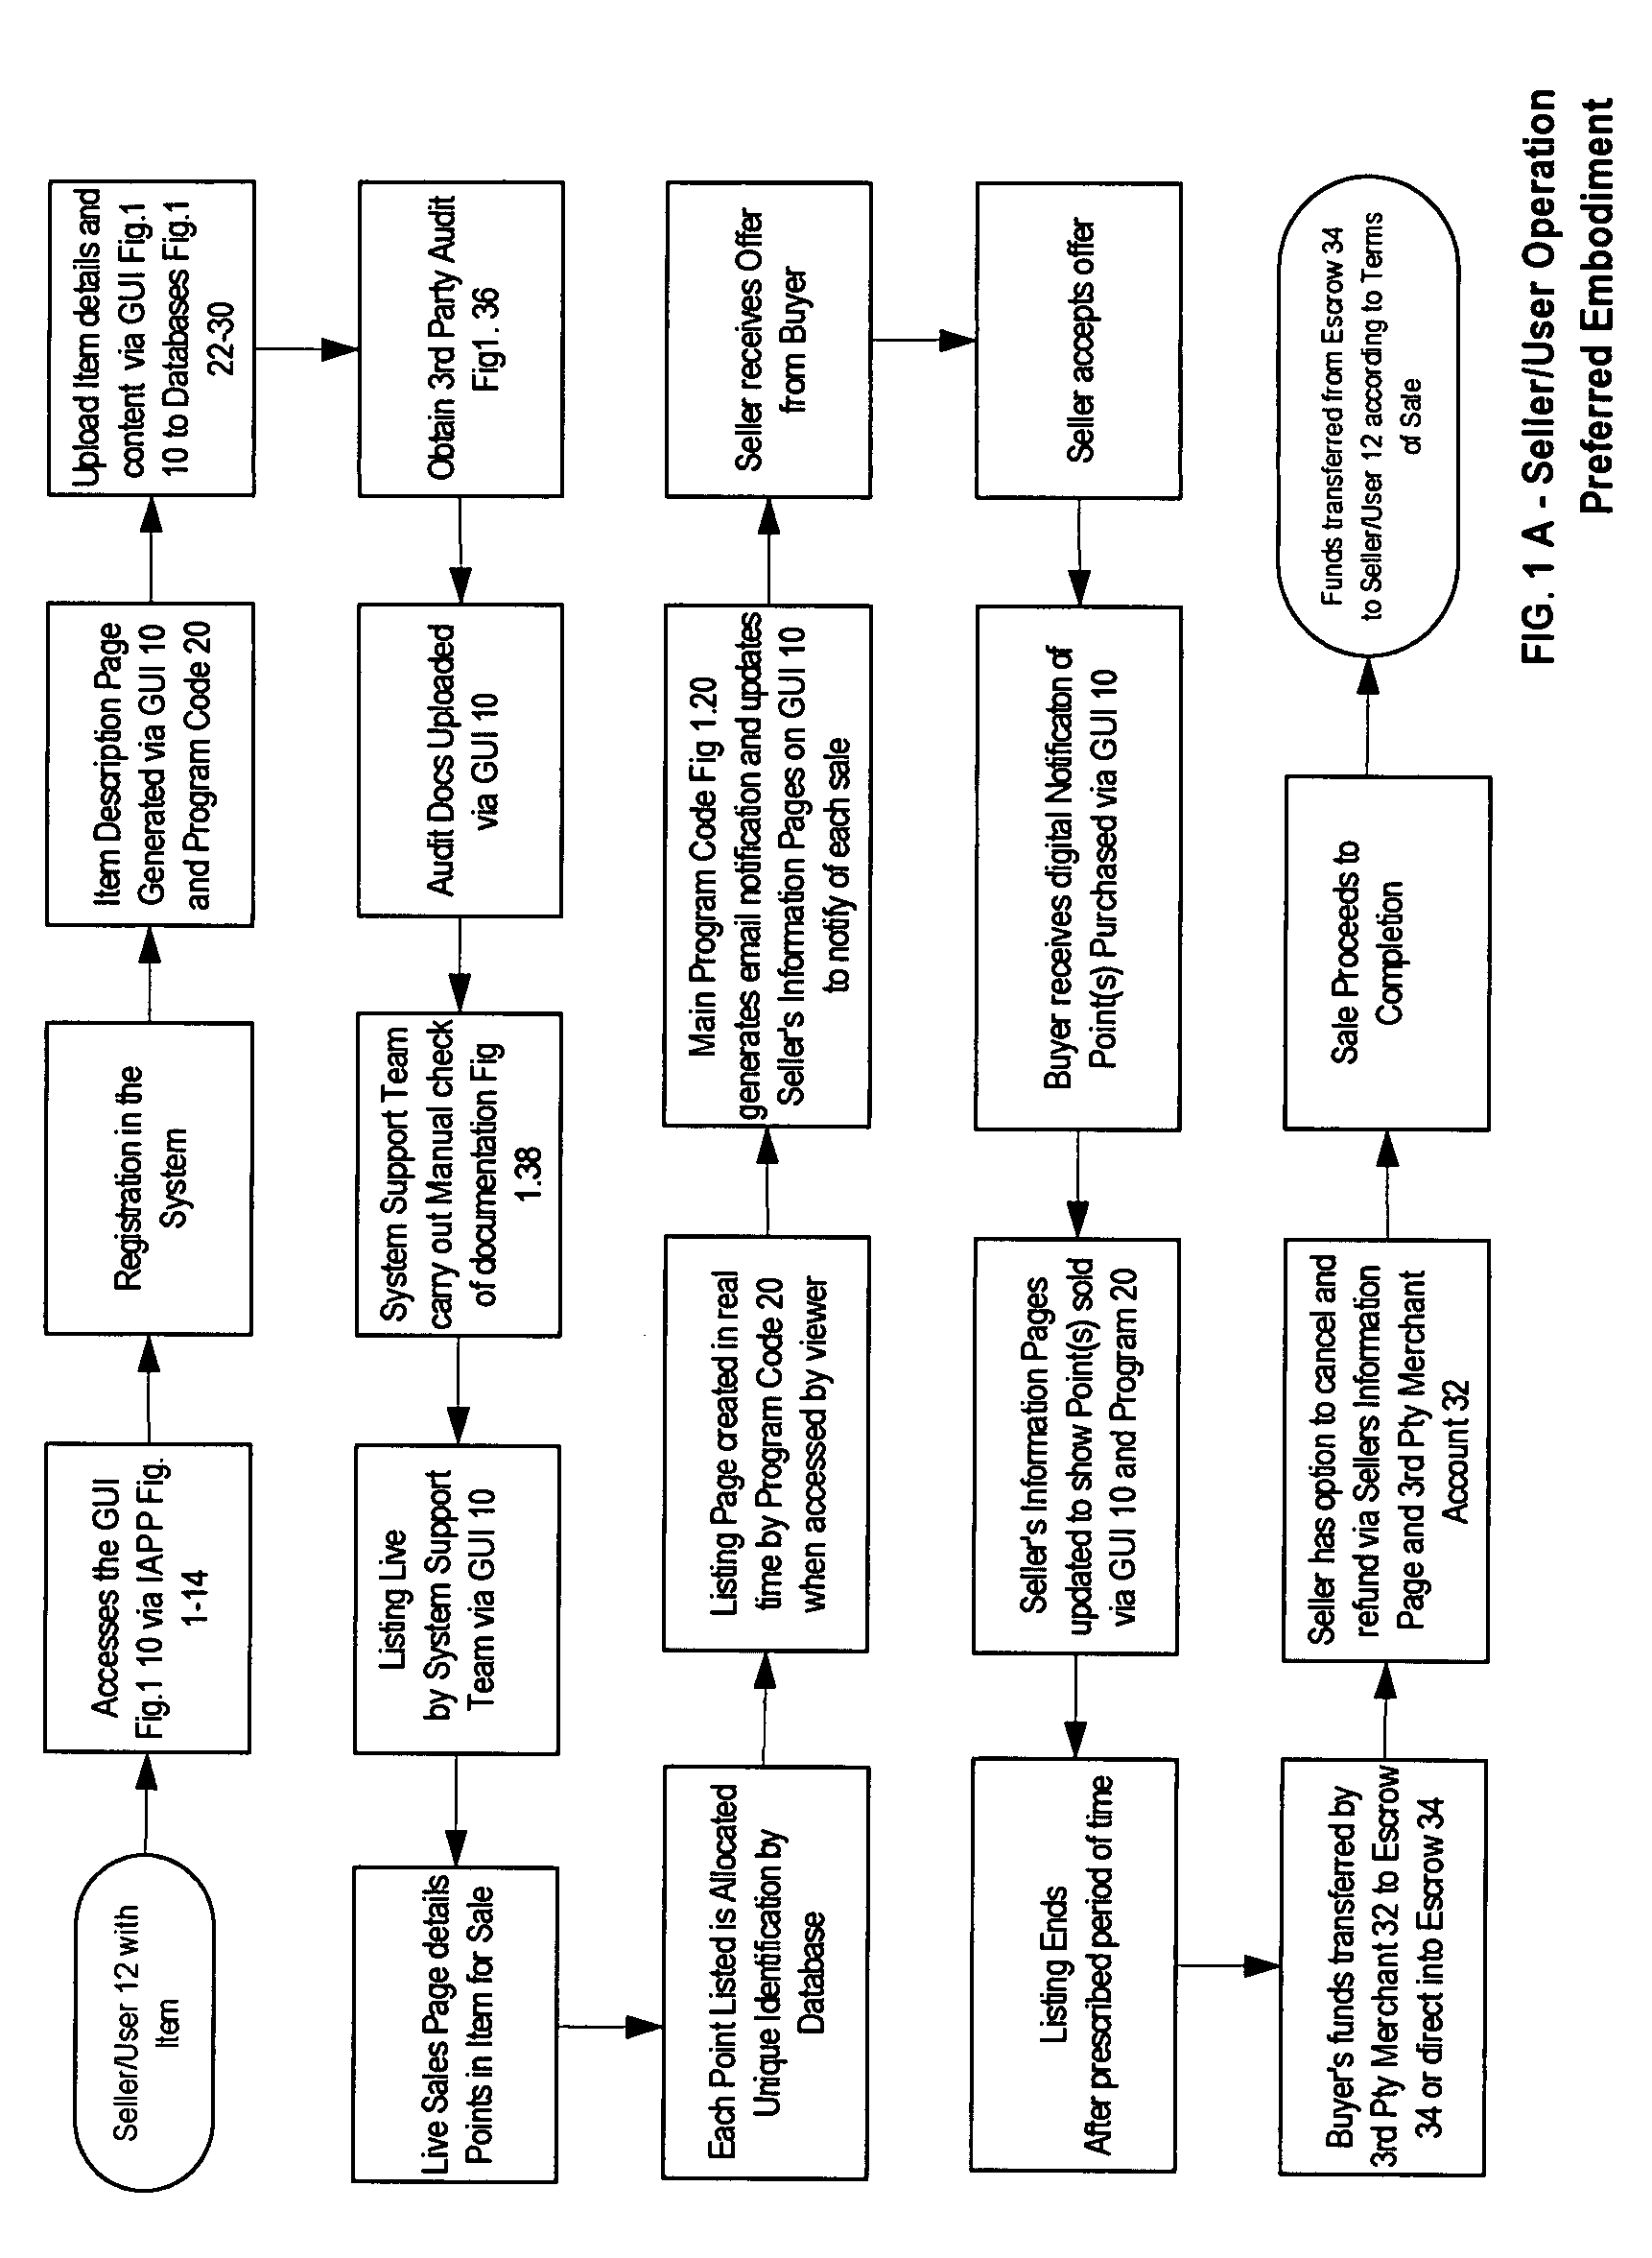 Method and instrument for generating and trading identifiable plural ownership rights in assets